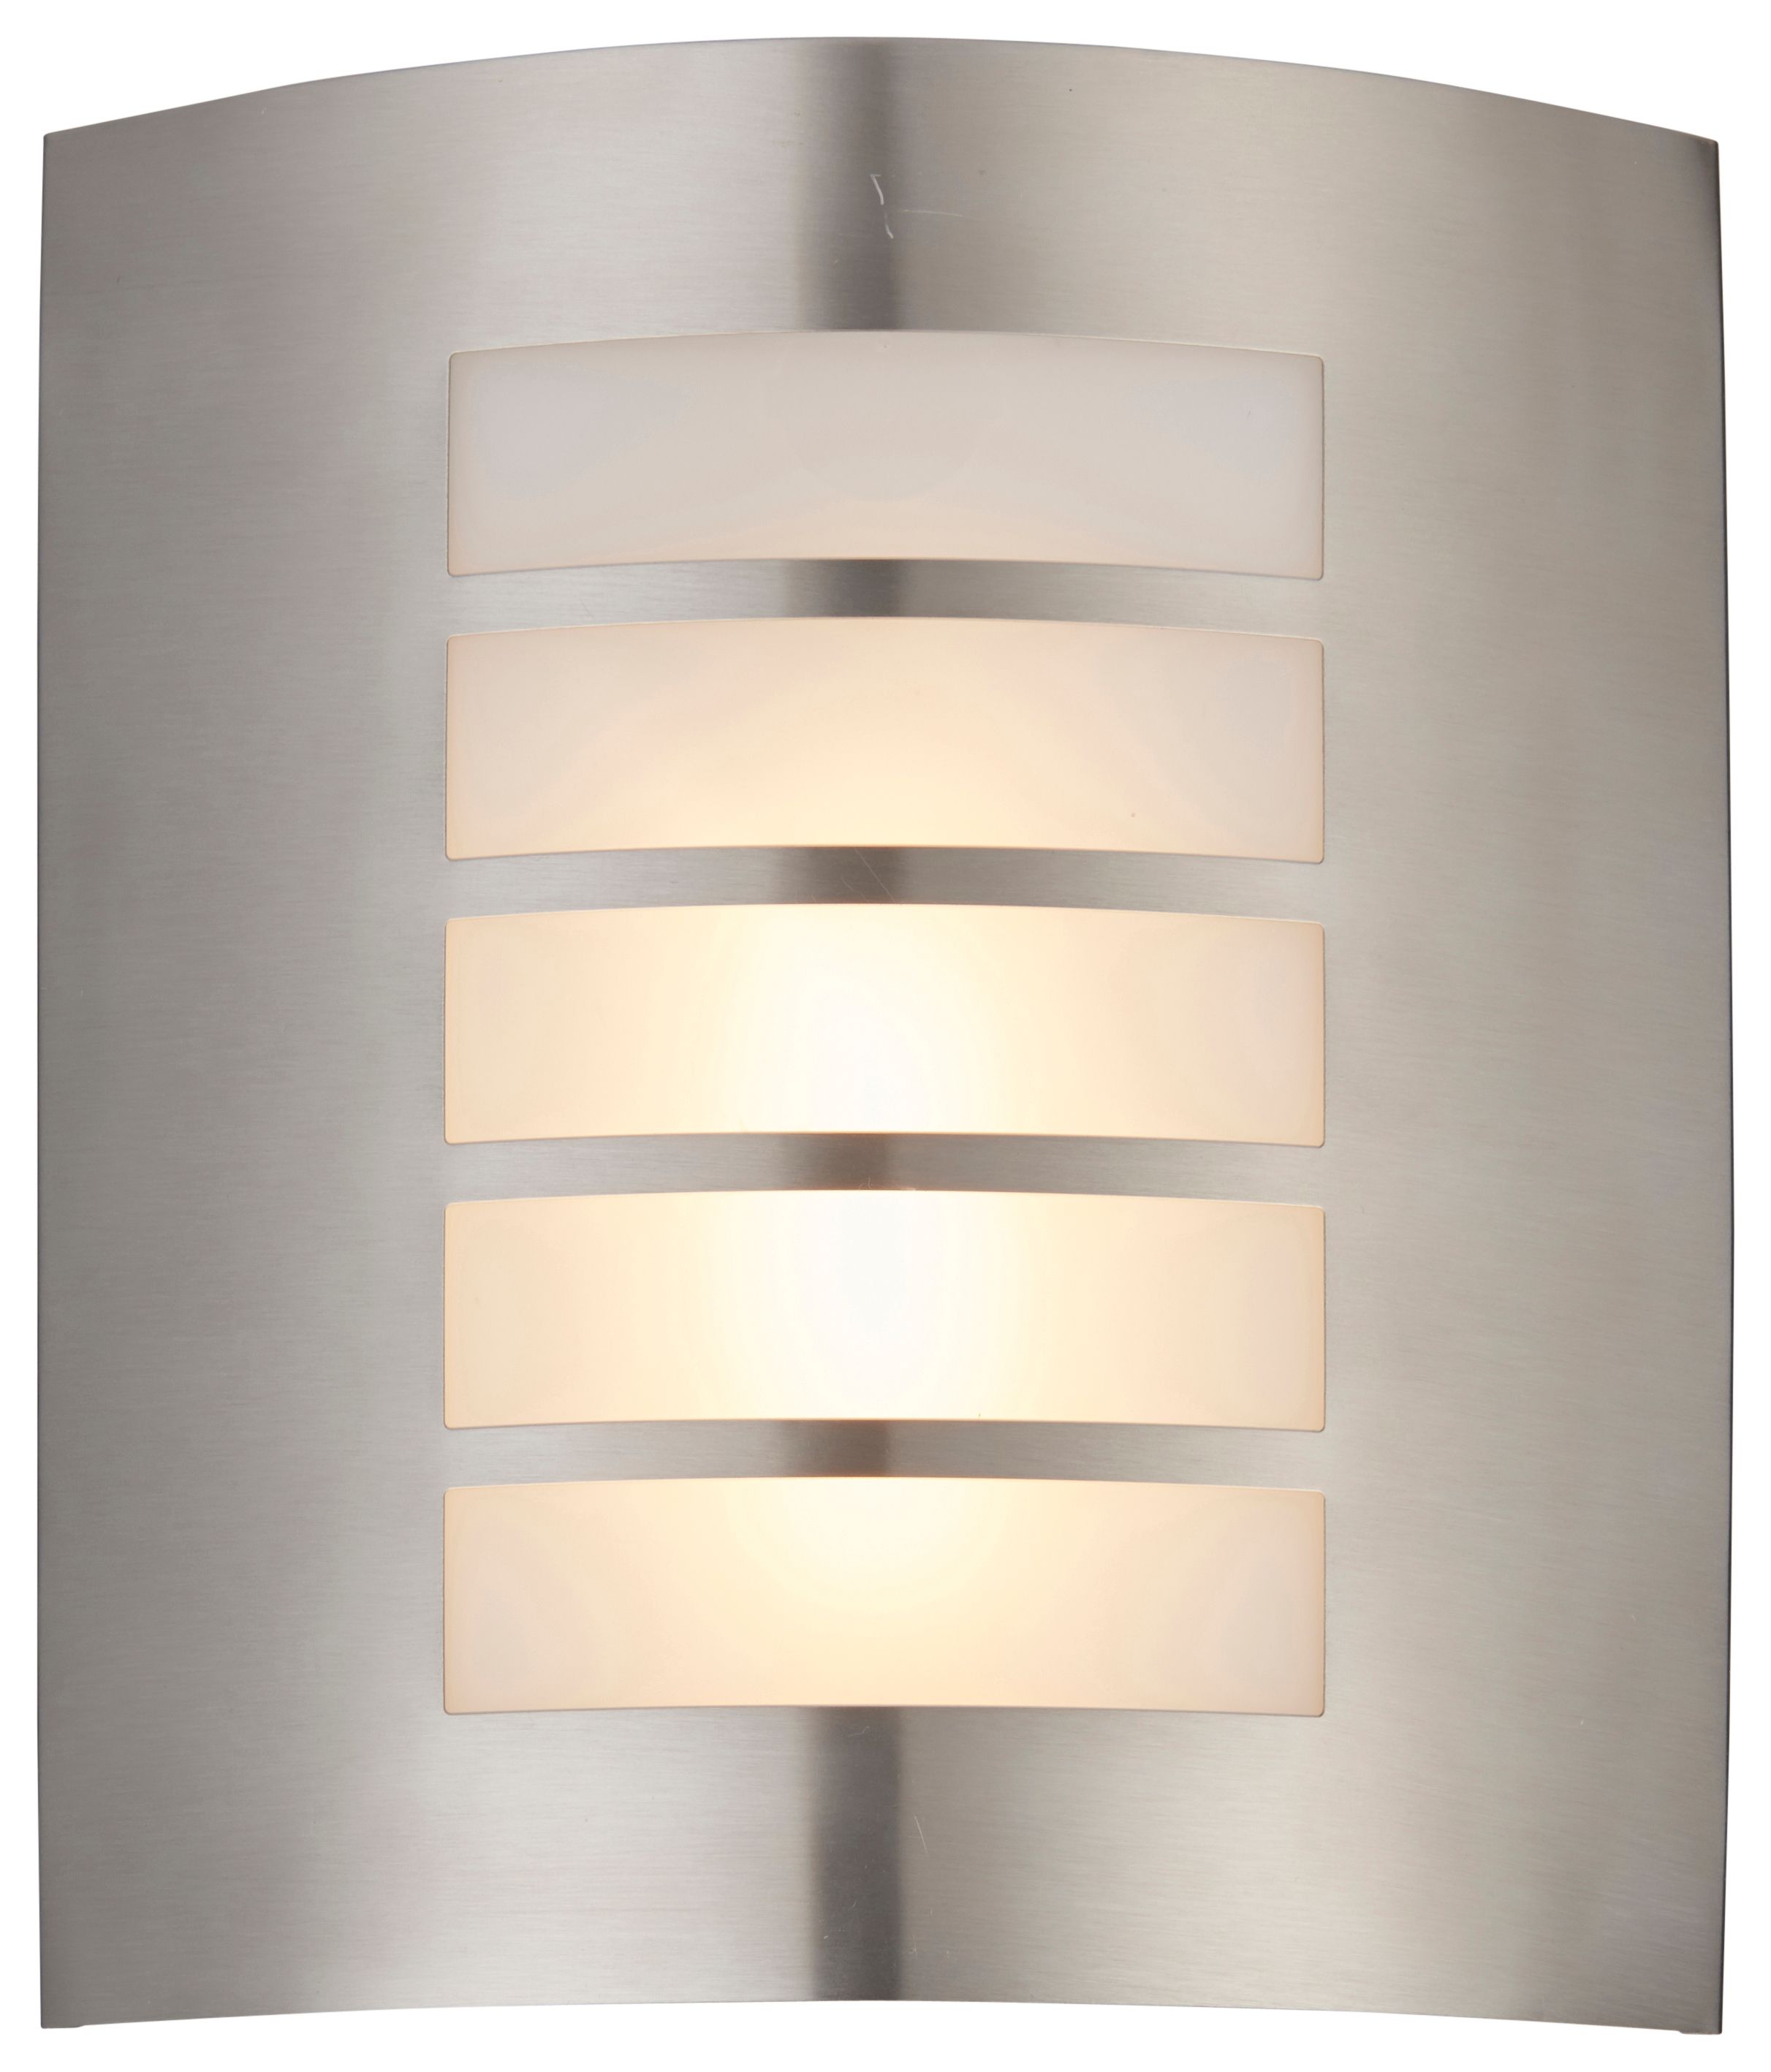 Image of Saxby Reel Brushed Stainless Steel & Opal Polycarbonate Wall Light